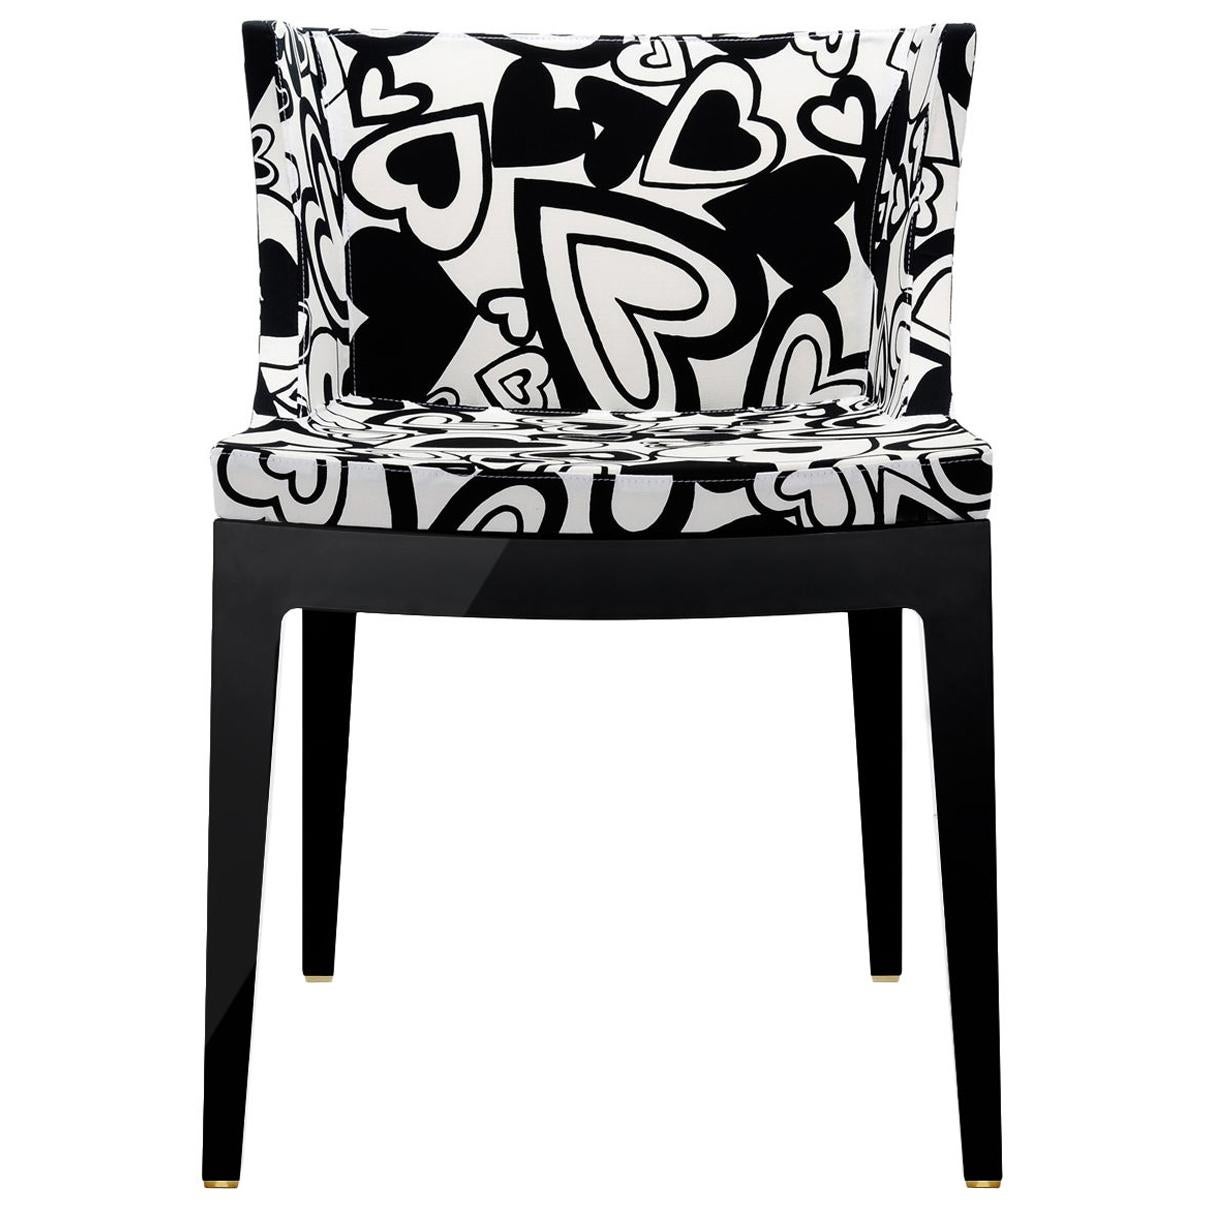 Kartell Mademoiselle "A La Mode" Moschino Black Hearts Chair by Philippe Starck